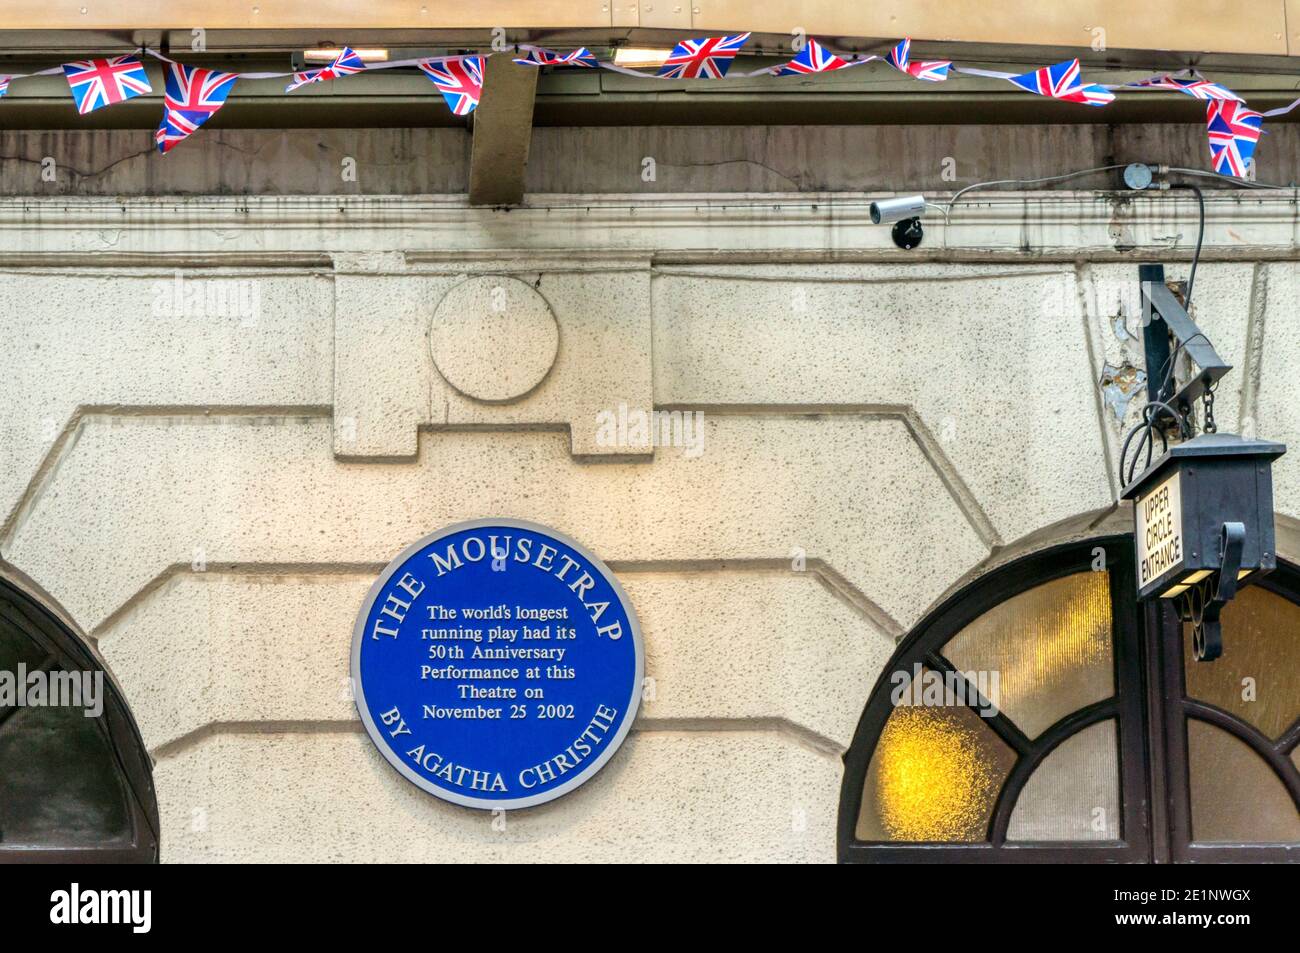 A blue plaque commemorates the 50th aaniversary performance of The Mousetrap by Agatha Christie at St Martin's Theatre in London's West End. Stock Photo